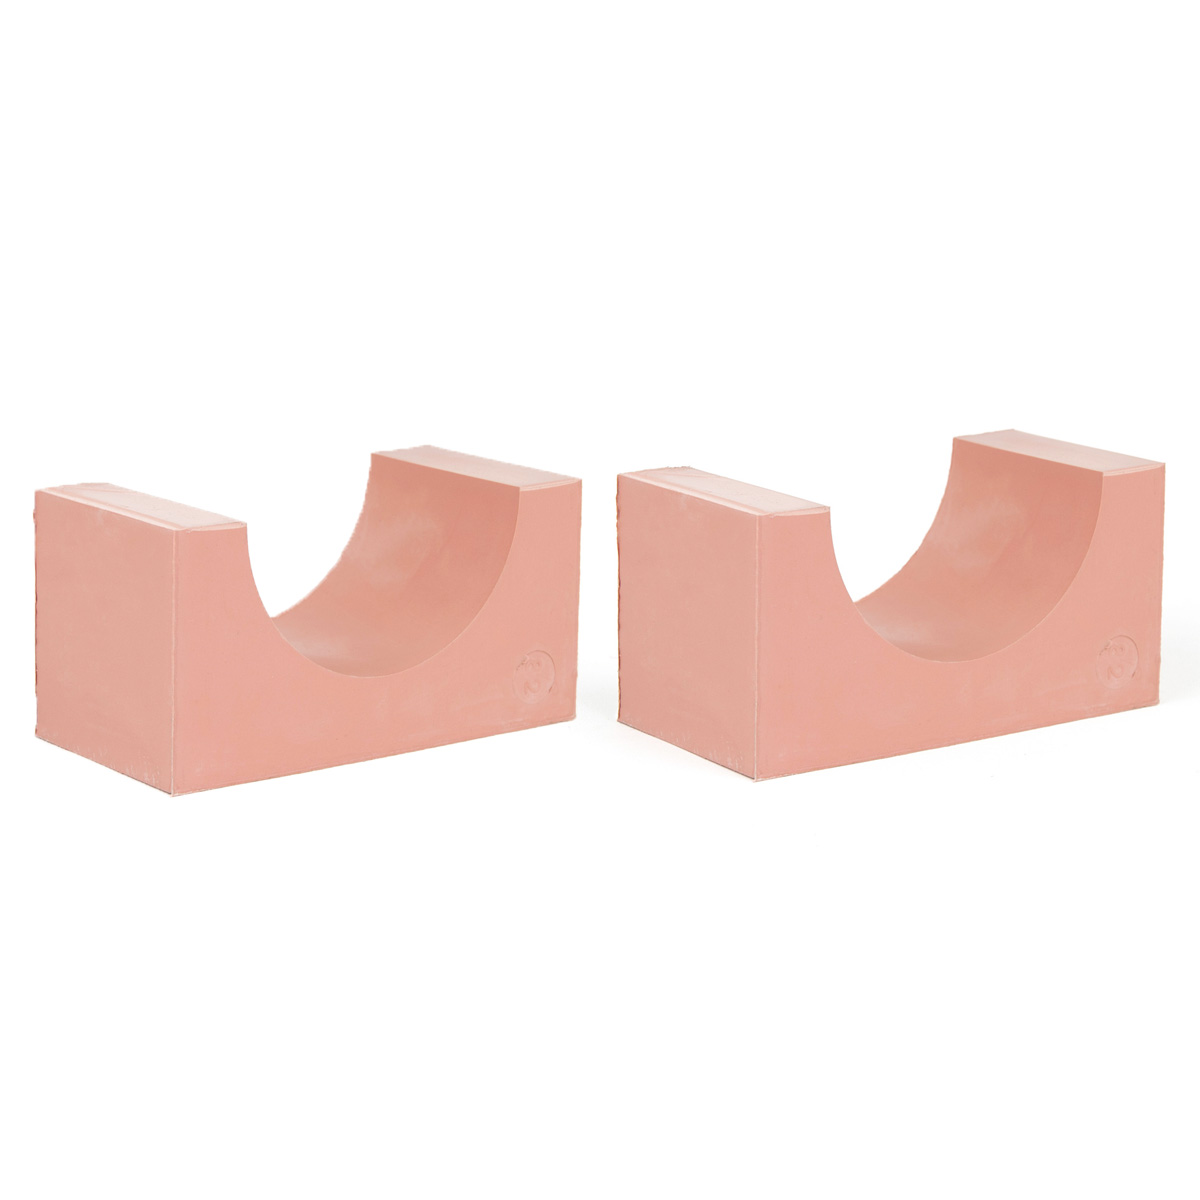 120-82*2 Set of 2 half insert block lycron, 120-82 for cable/pipe diam. 81.5-83.5mm